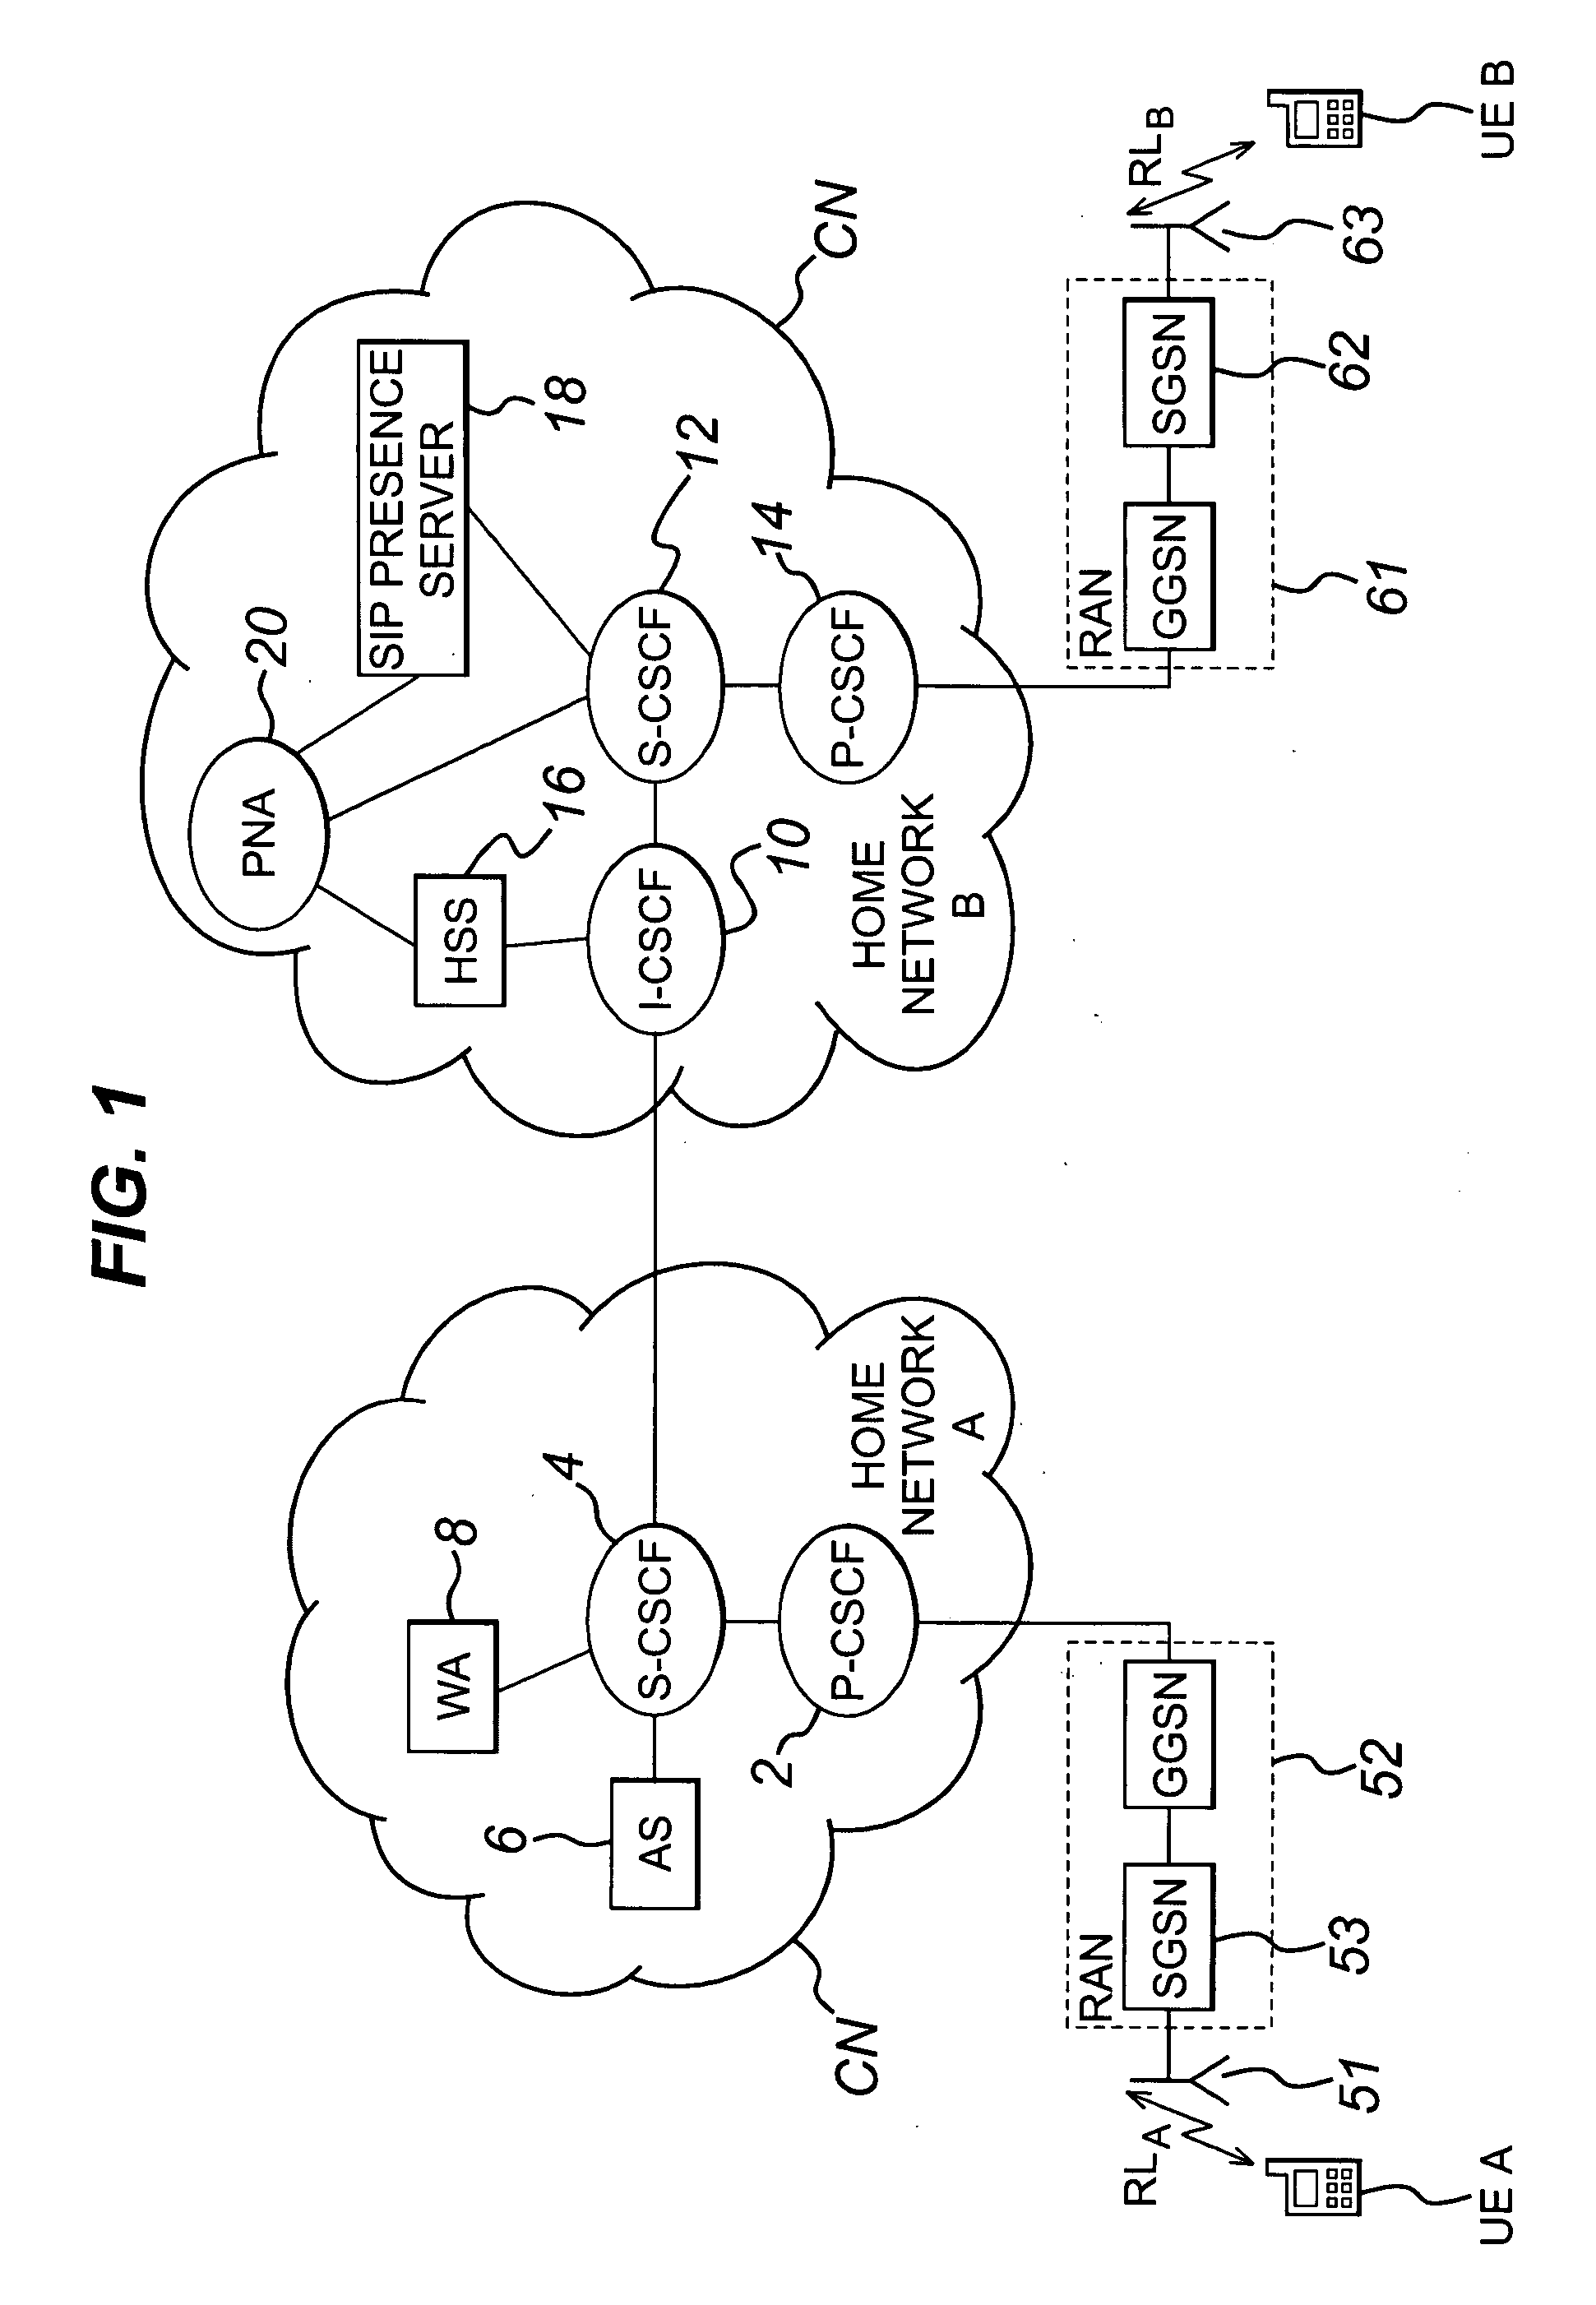 Presence services in a wireless communications network